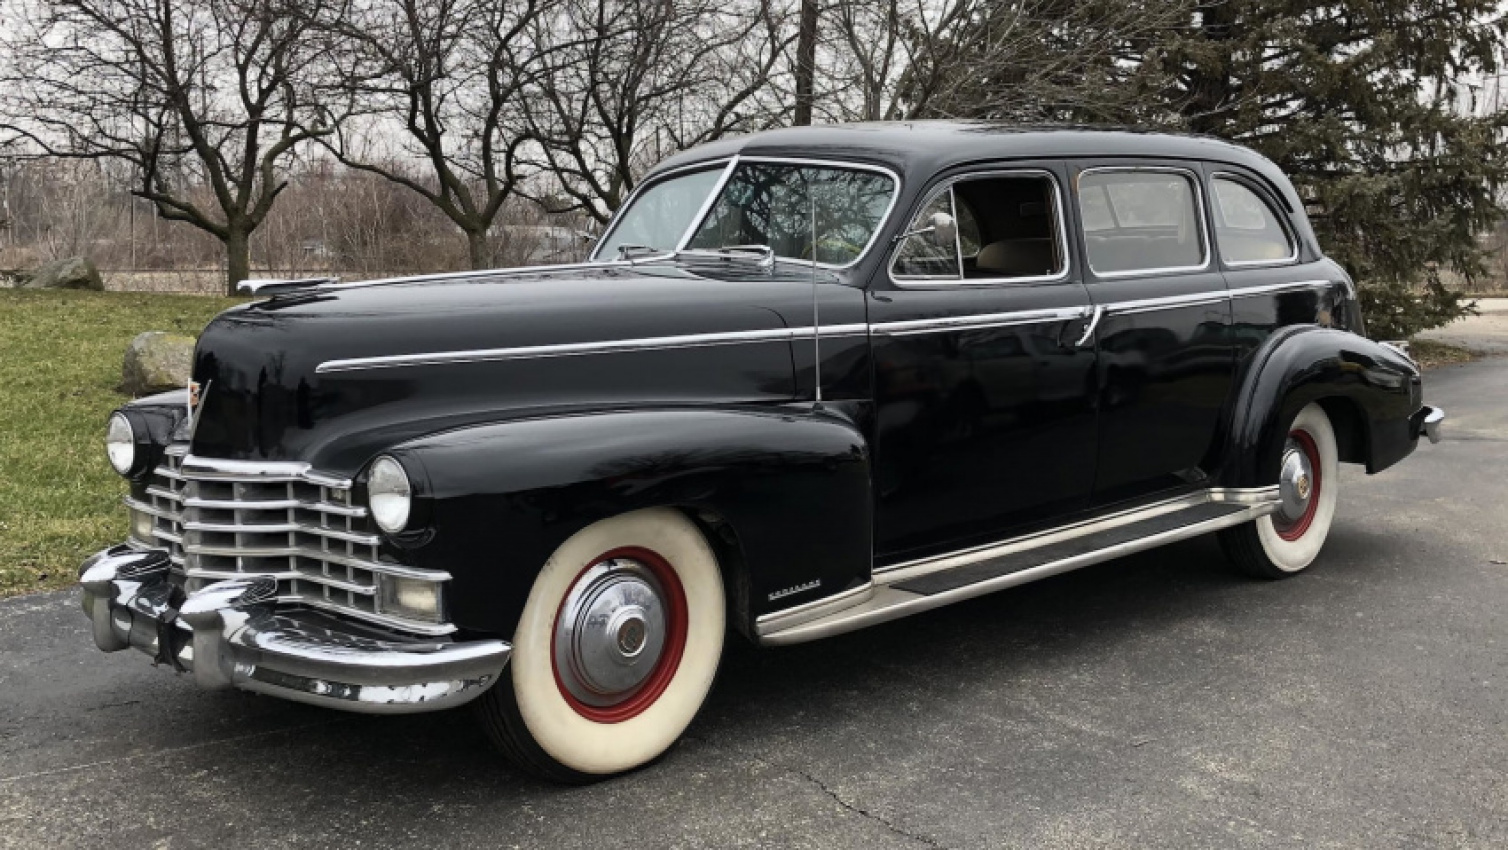 autos, cadillac, cars, classic cars, 1940s, year in review, series 75 cadillac history 1946